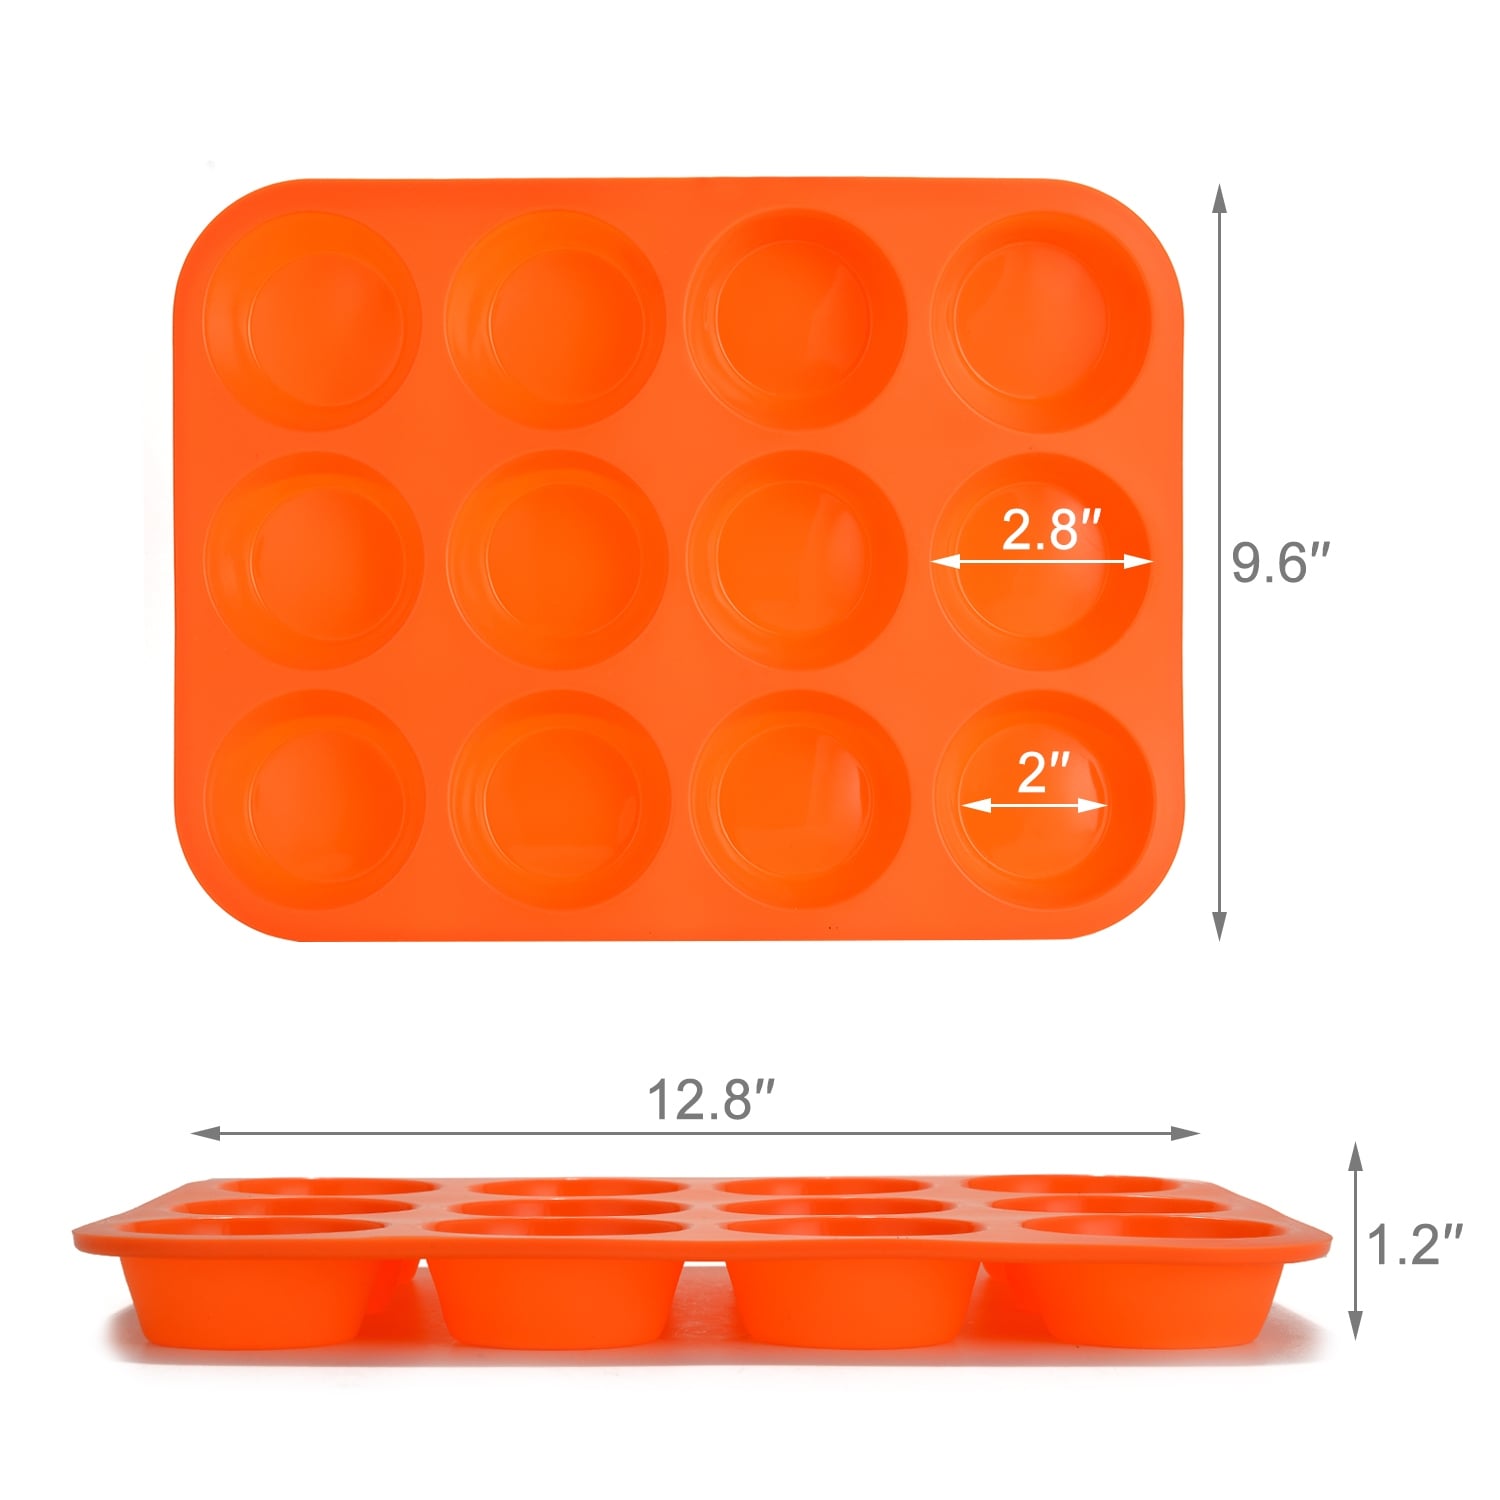 https://ak1.ostkcdn.com/images/products/is/images/direct/8b6cd17c639741389a067fb001165a0a4bba9302/12-Cup-Silicone-Muffin-Pan-for-Baking-BPA-Free.jpg